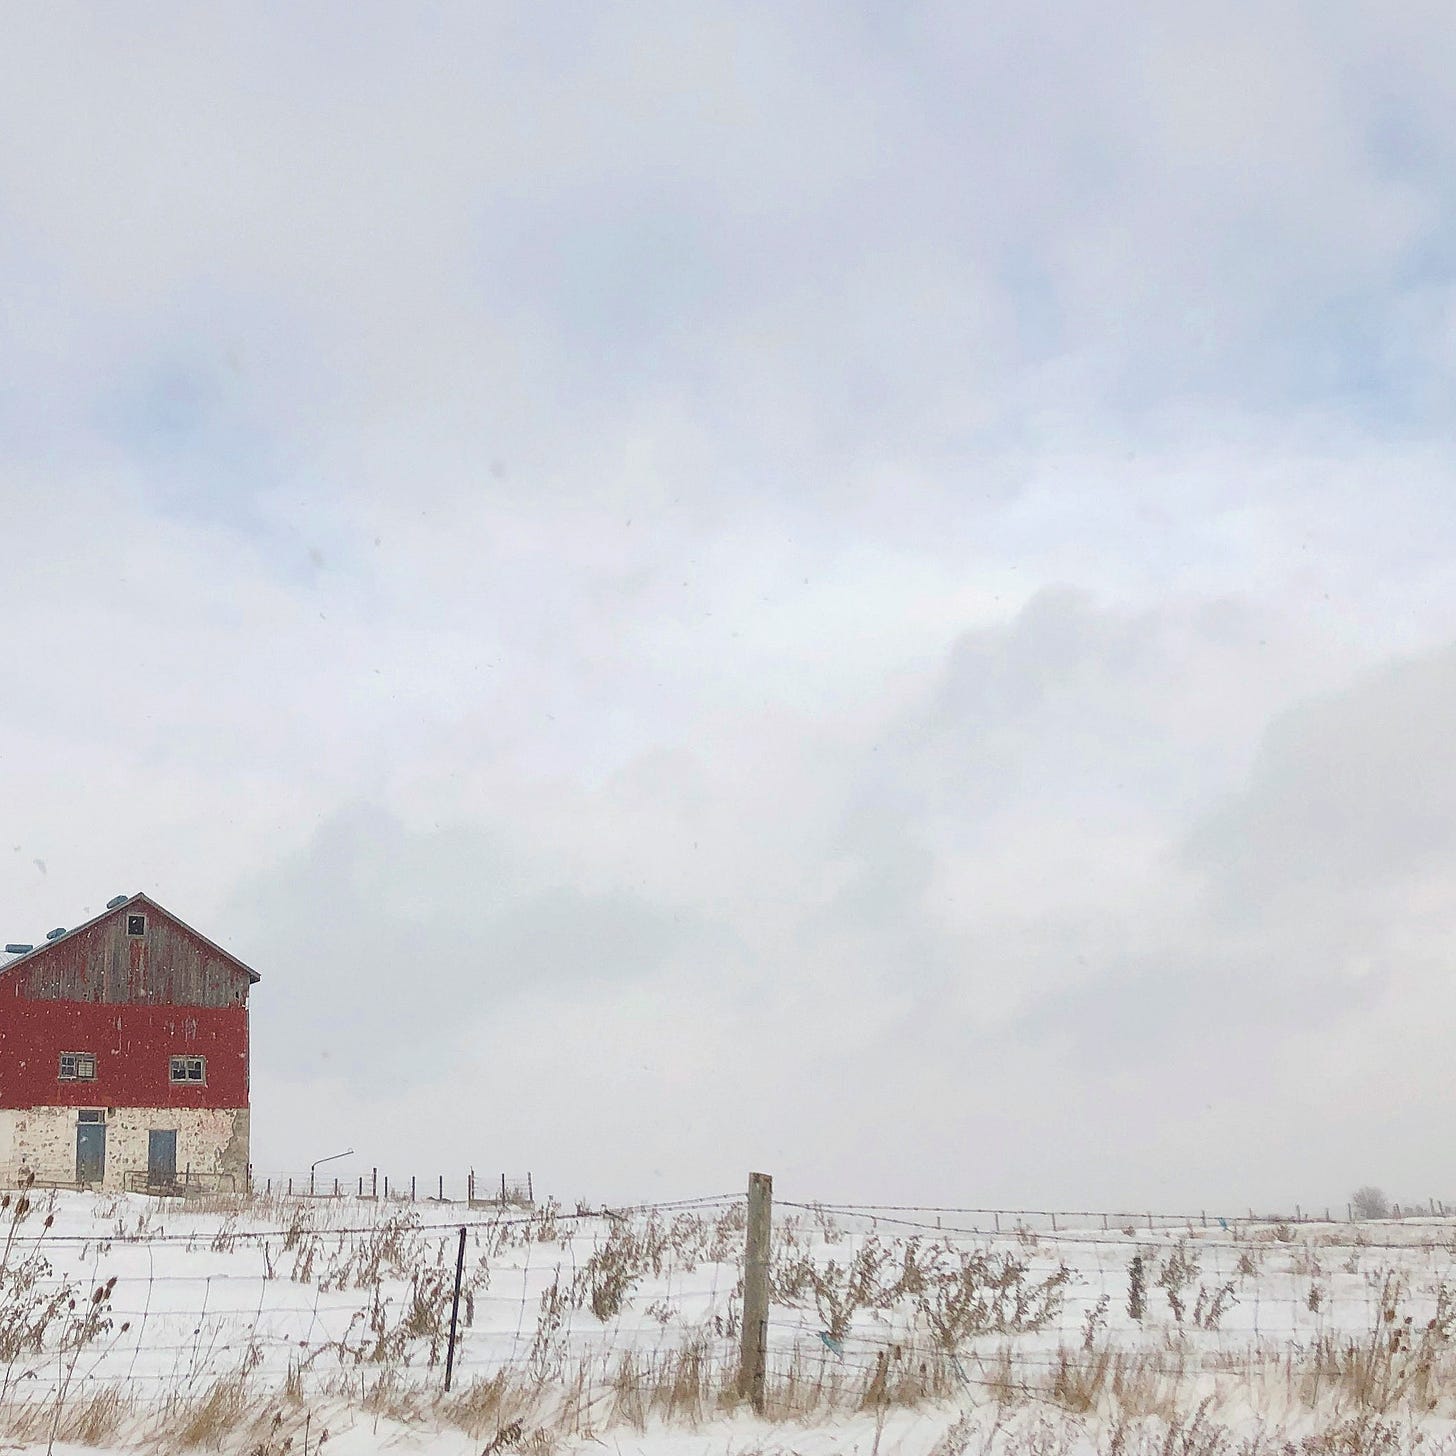 Red barn in winter. Guelph, Ontario. Christmas Day 2022.